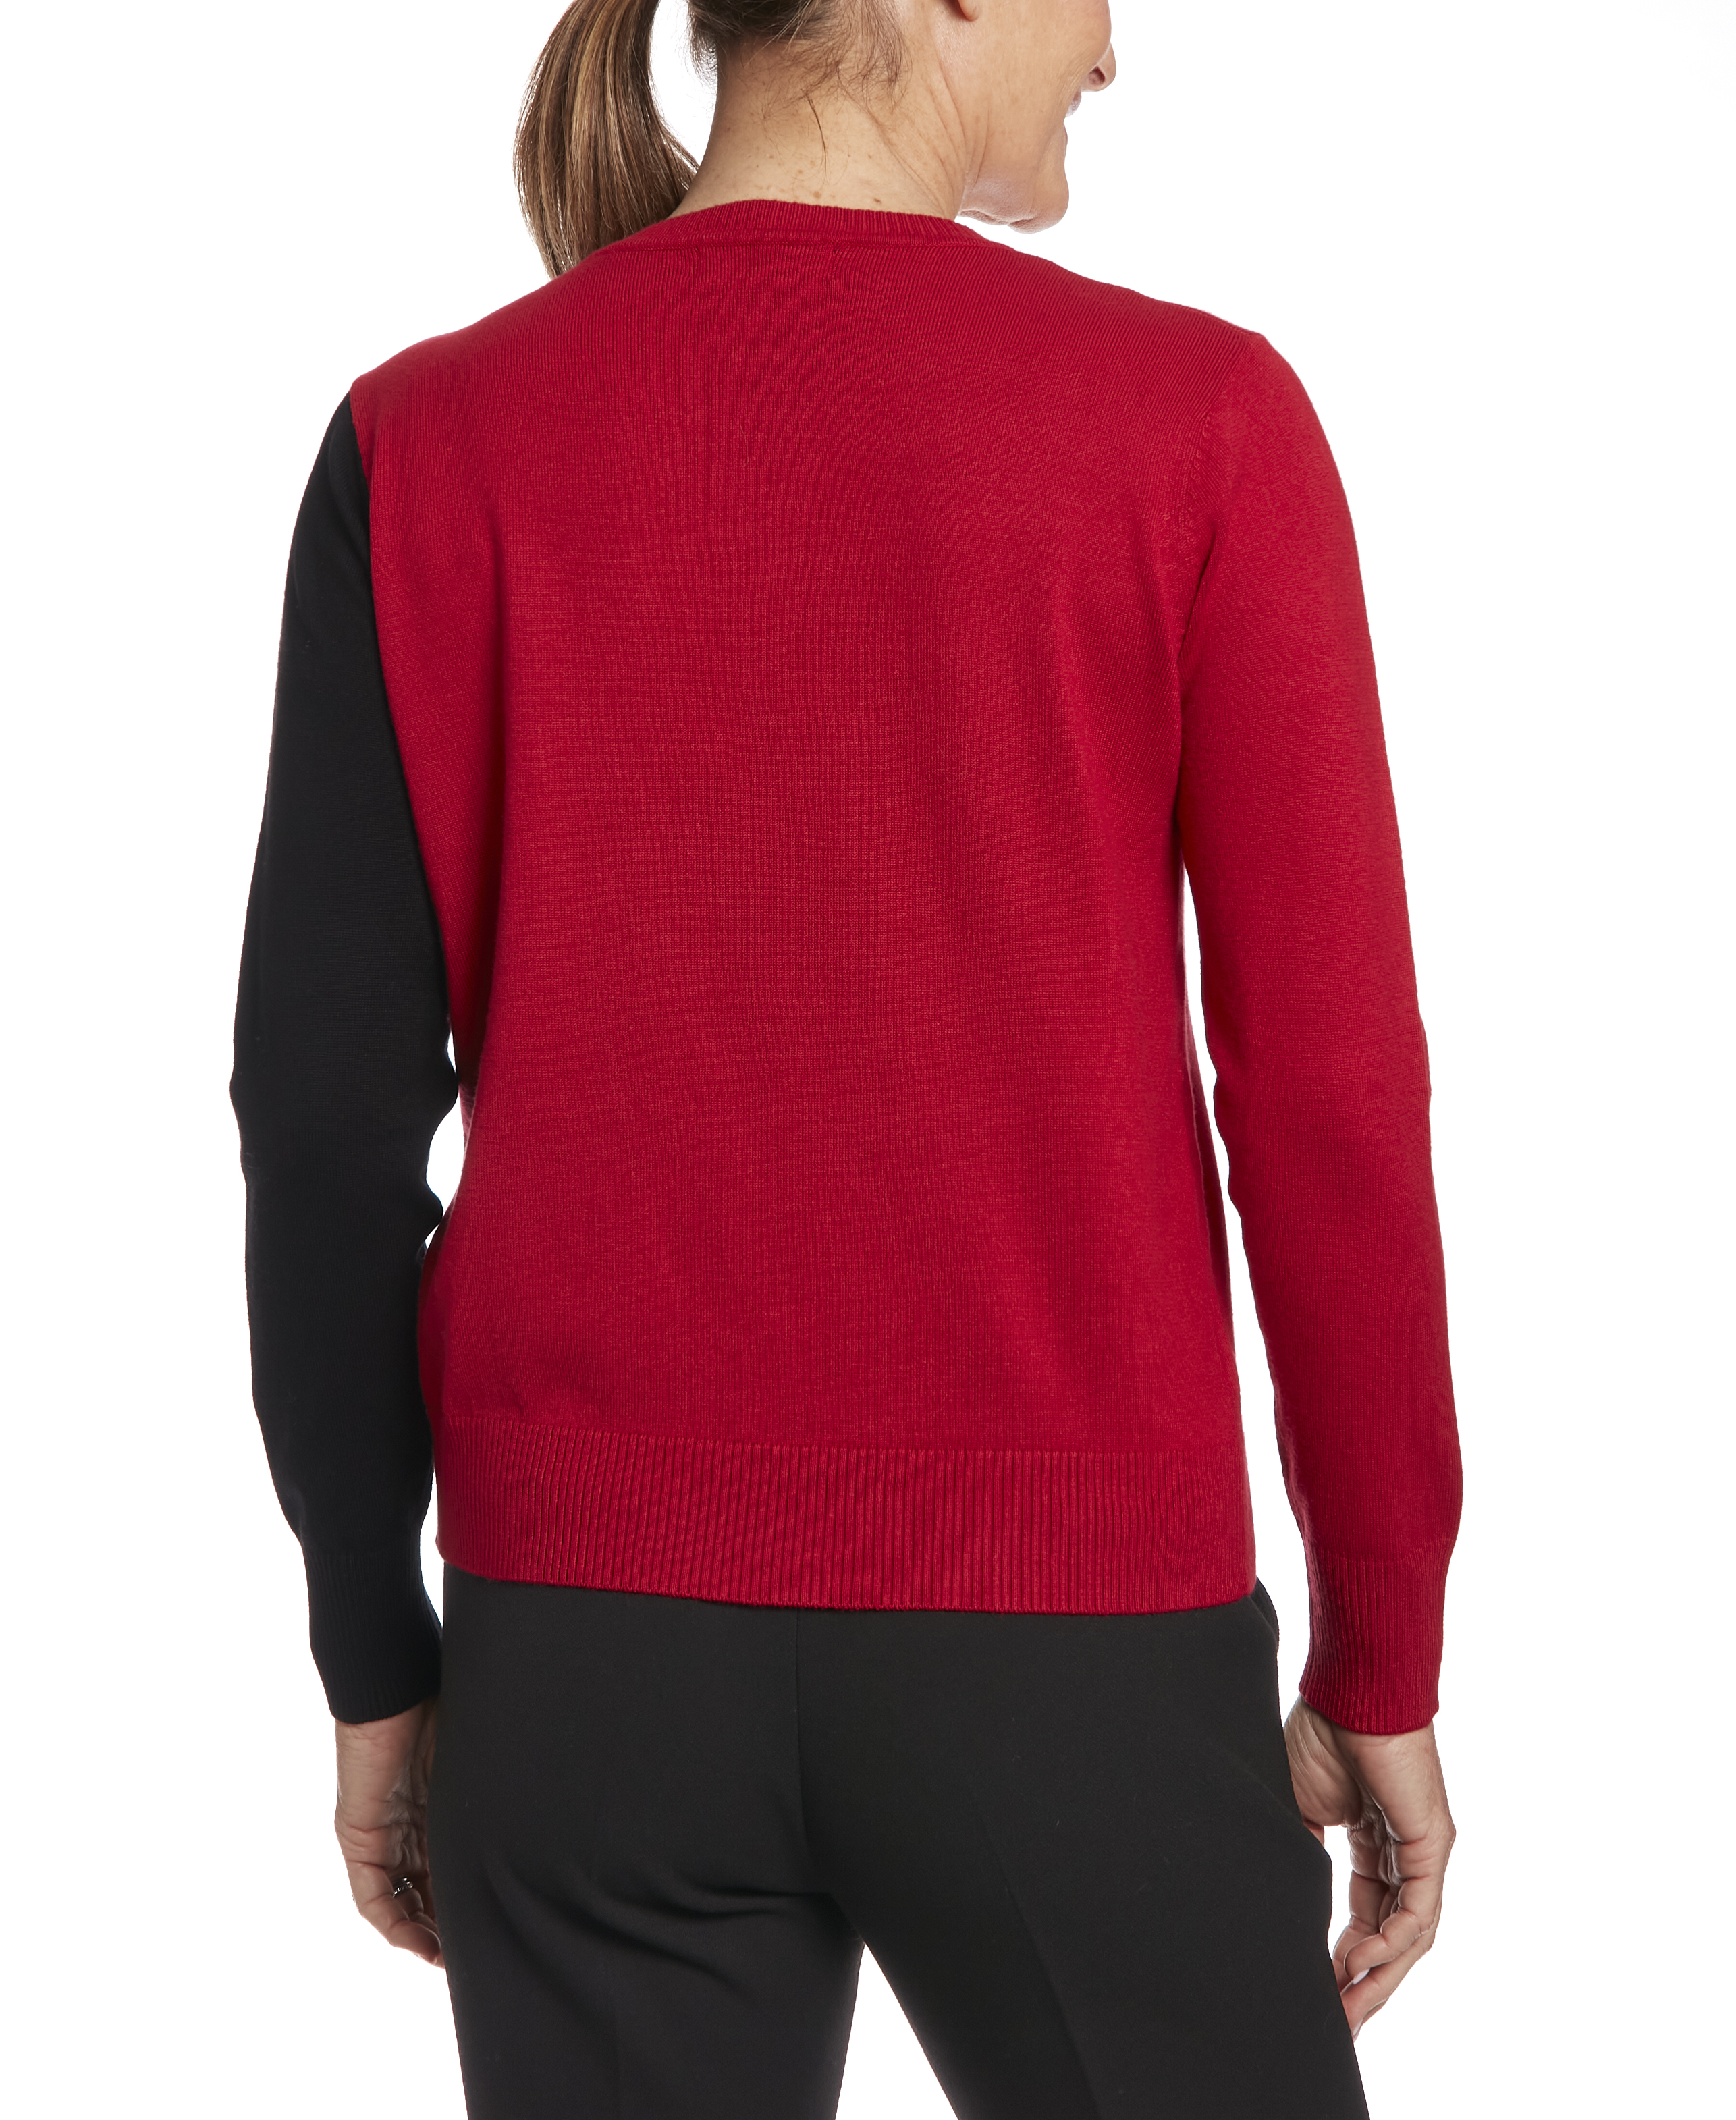 Pullover Sweater with Snap Detailing in Scarlet/Black